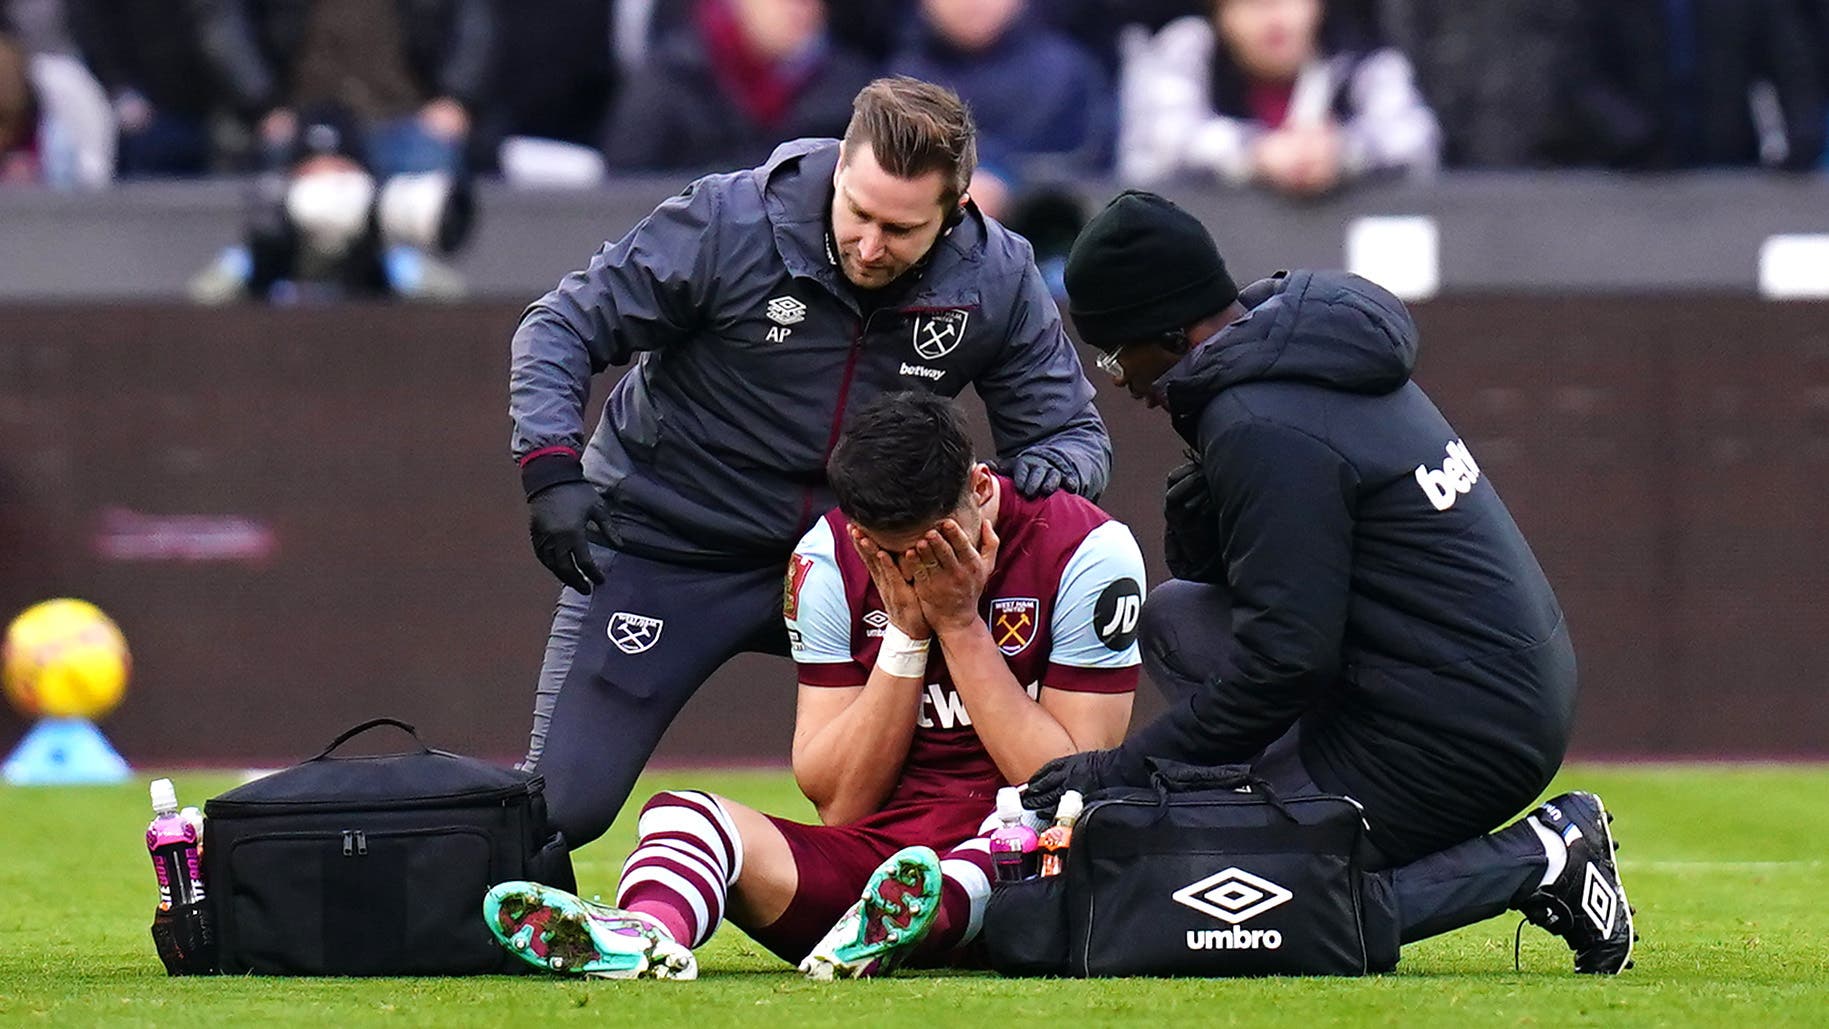 Injuries are part of football – Moyes stands by decision to play strongest team